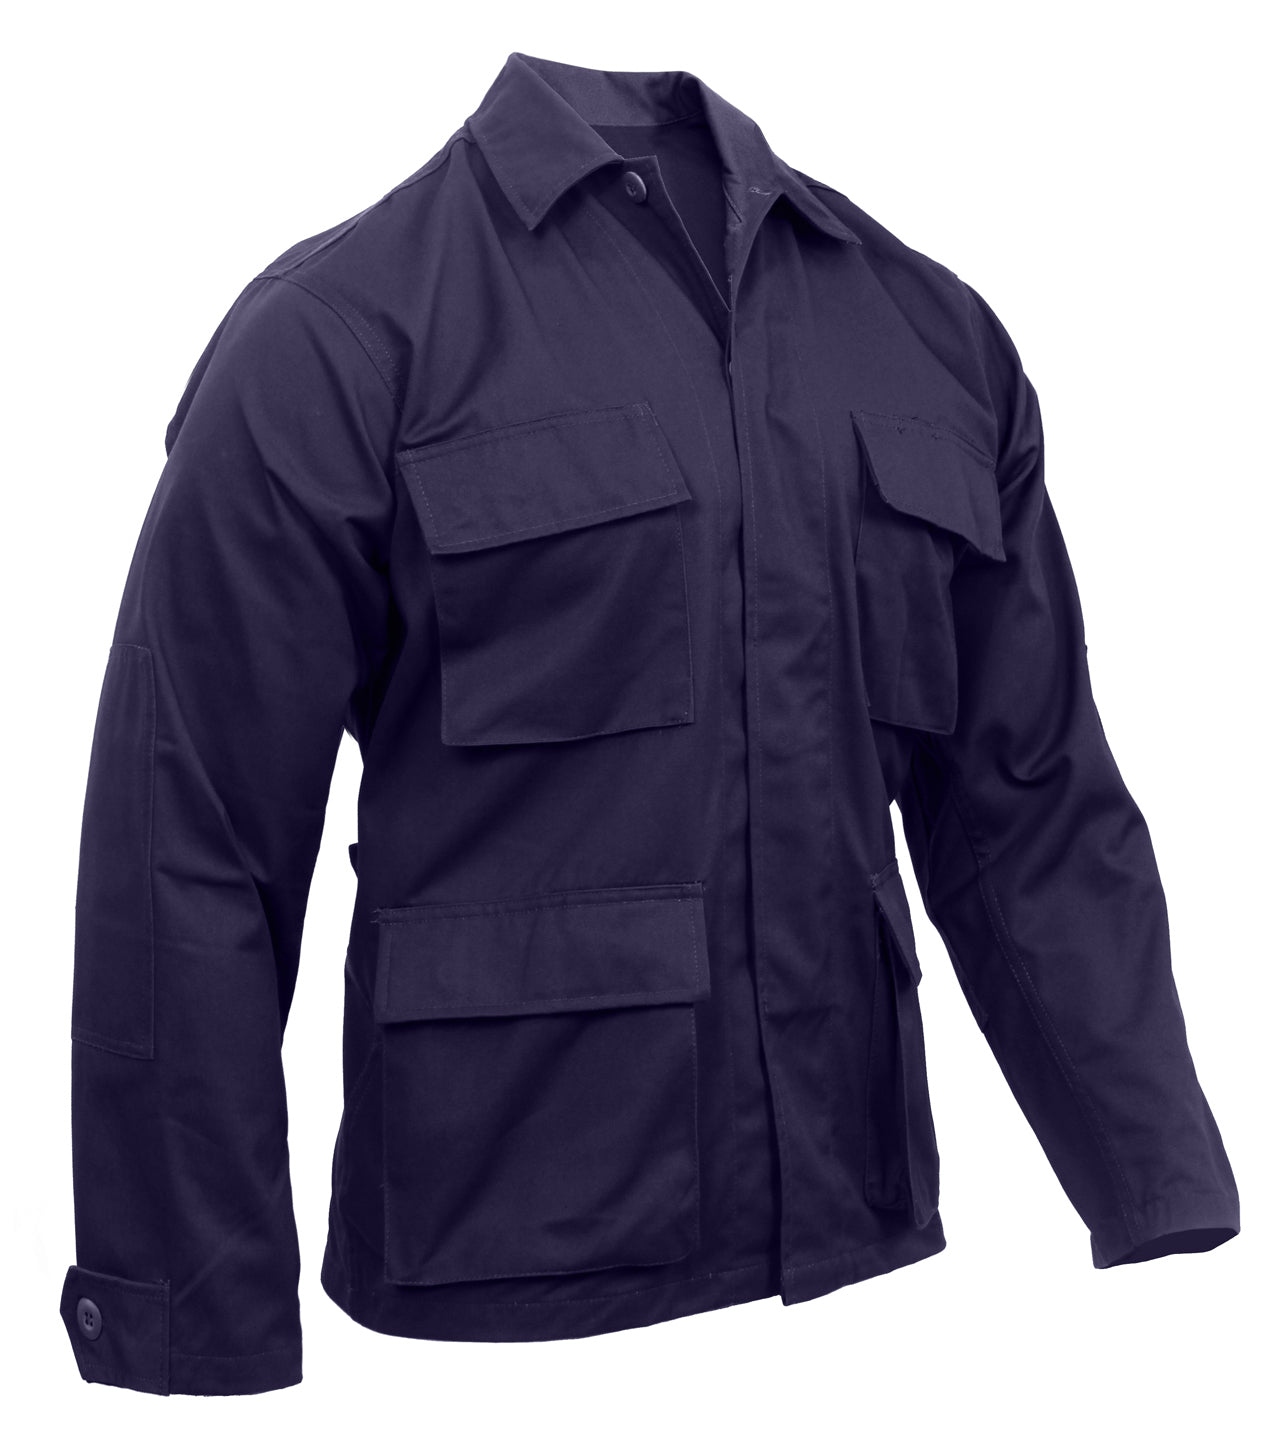 Milspec Poly/Cotton Twill Solid BDU Shirts Big & Tall Shirts MilTac Tactical Military Outdoor Gear Australia